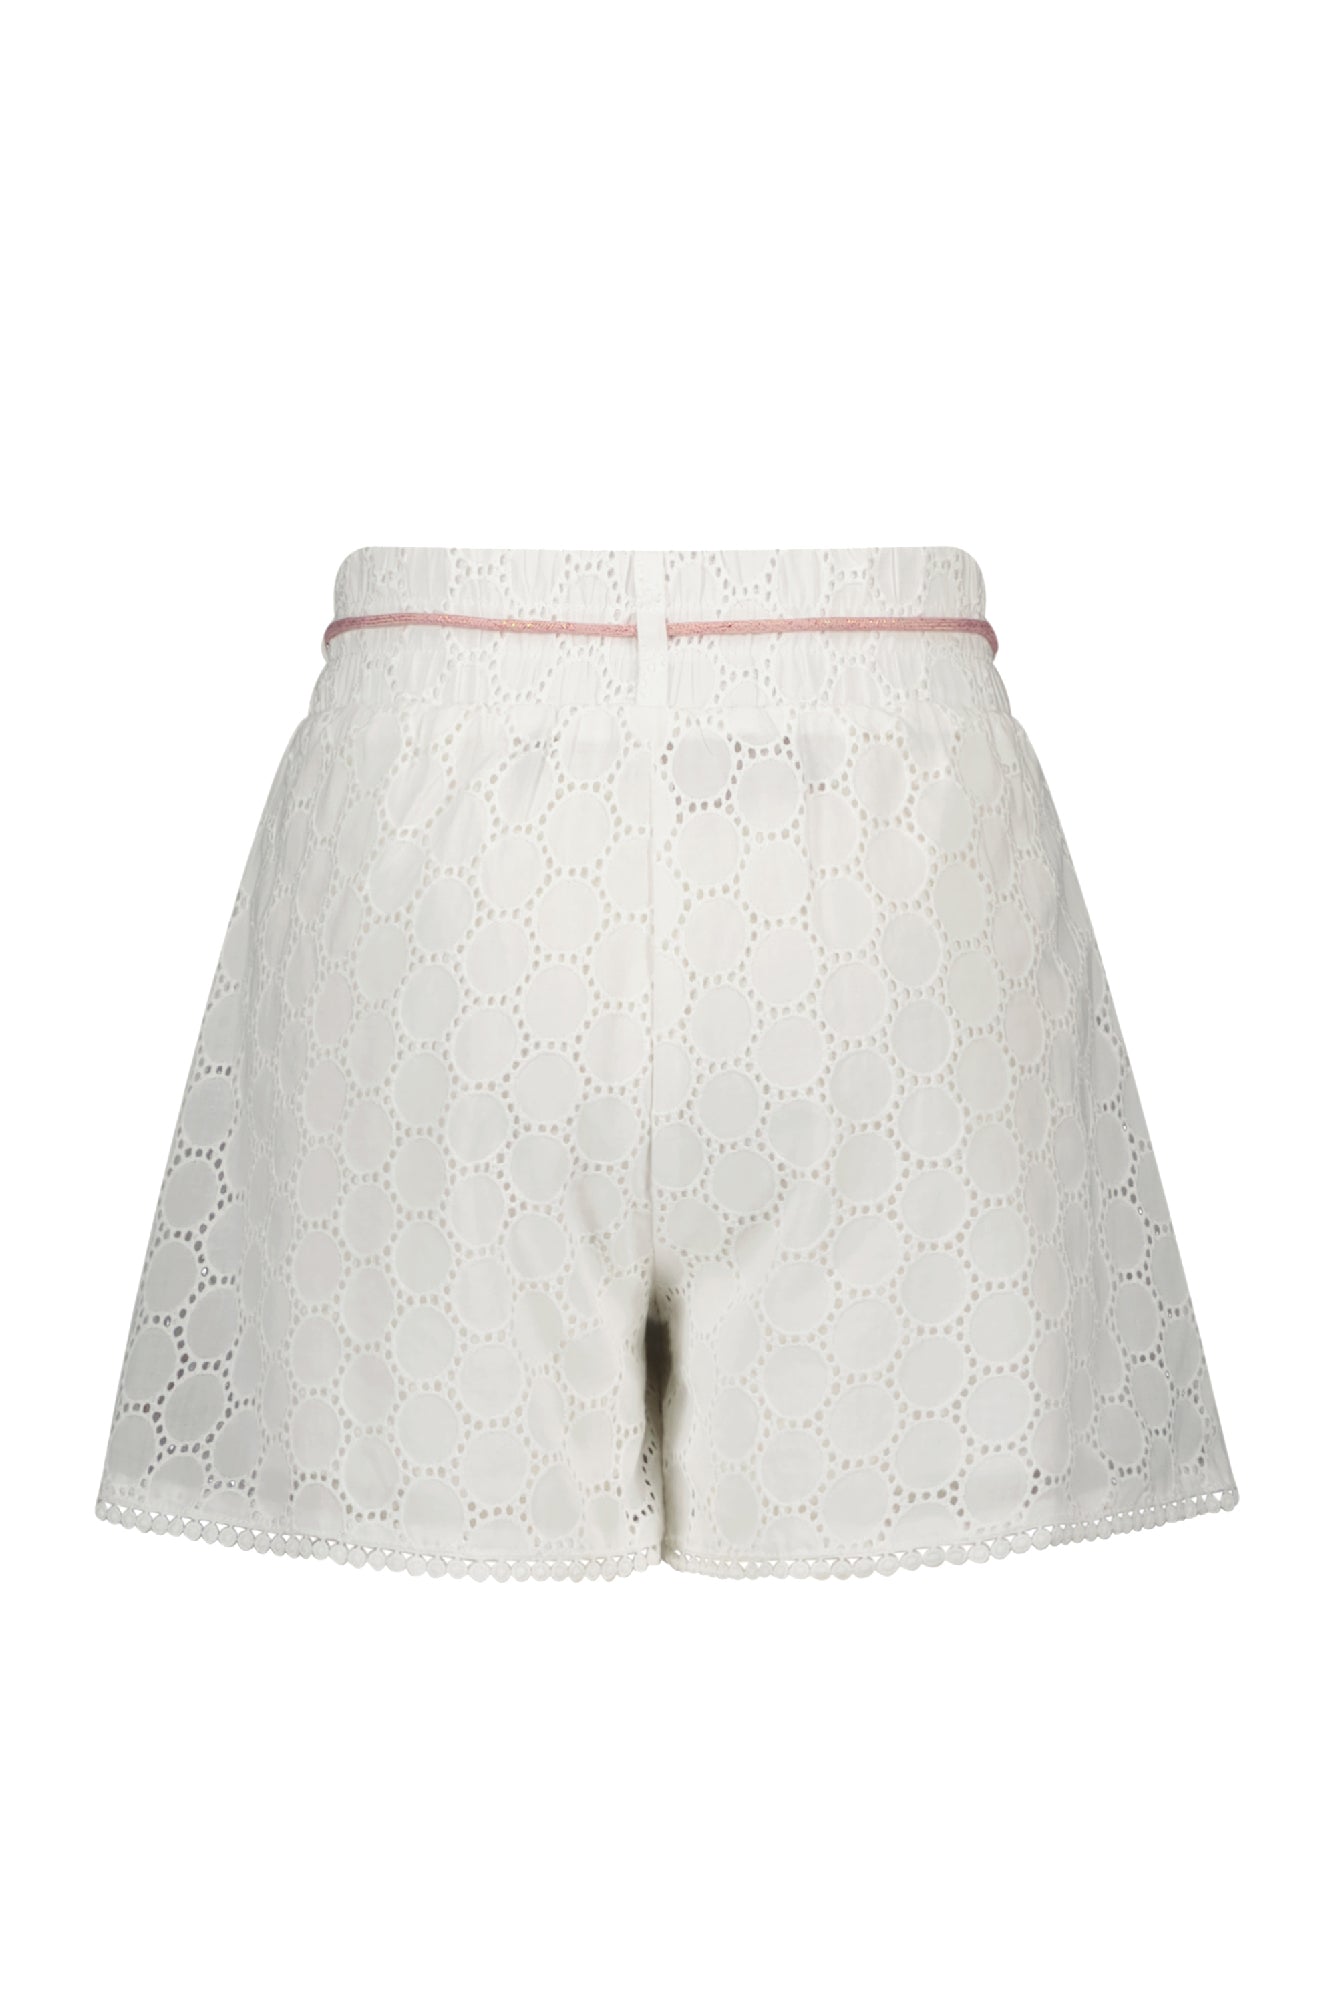 Meisjes Shampy embroidered wide fitted short van NoNo in de kleur Pearled Ivory in maat 134-140.